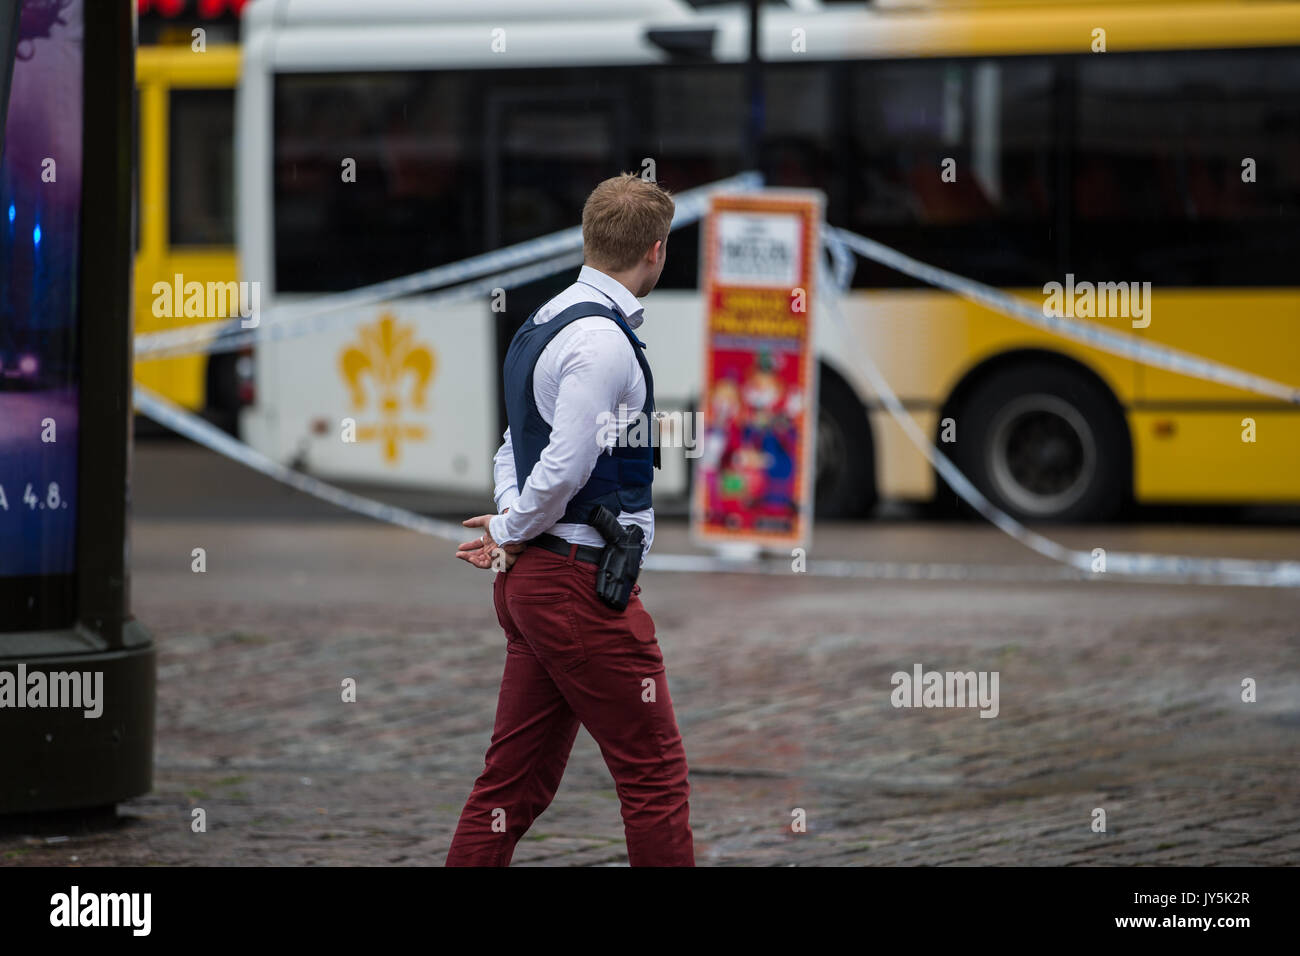 Turku, Finland. 18th of August 2017. Police guarding the area at Turku market Square. Two people have been killed and six others wounded in a knife attack at Turku market square and Puutori. The police was able to stop the attacker within minutes after the first emergency call by shooting him at thigh. Credit: Jarmo Piironen/Alamy Live News Stock Photo